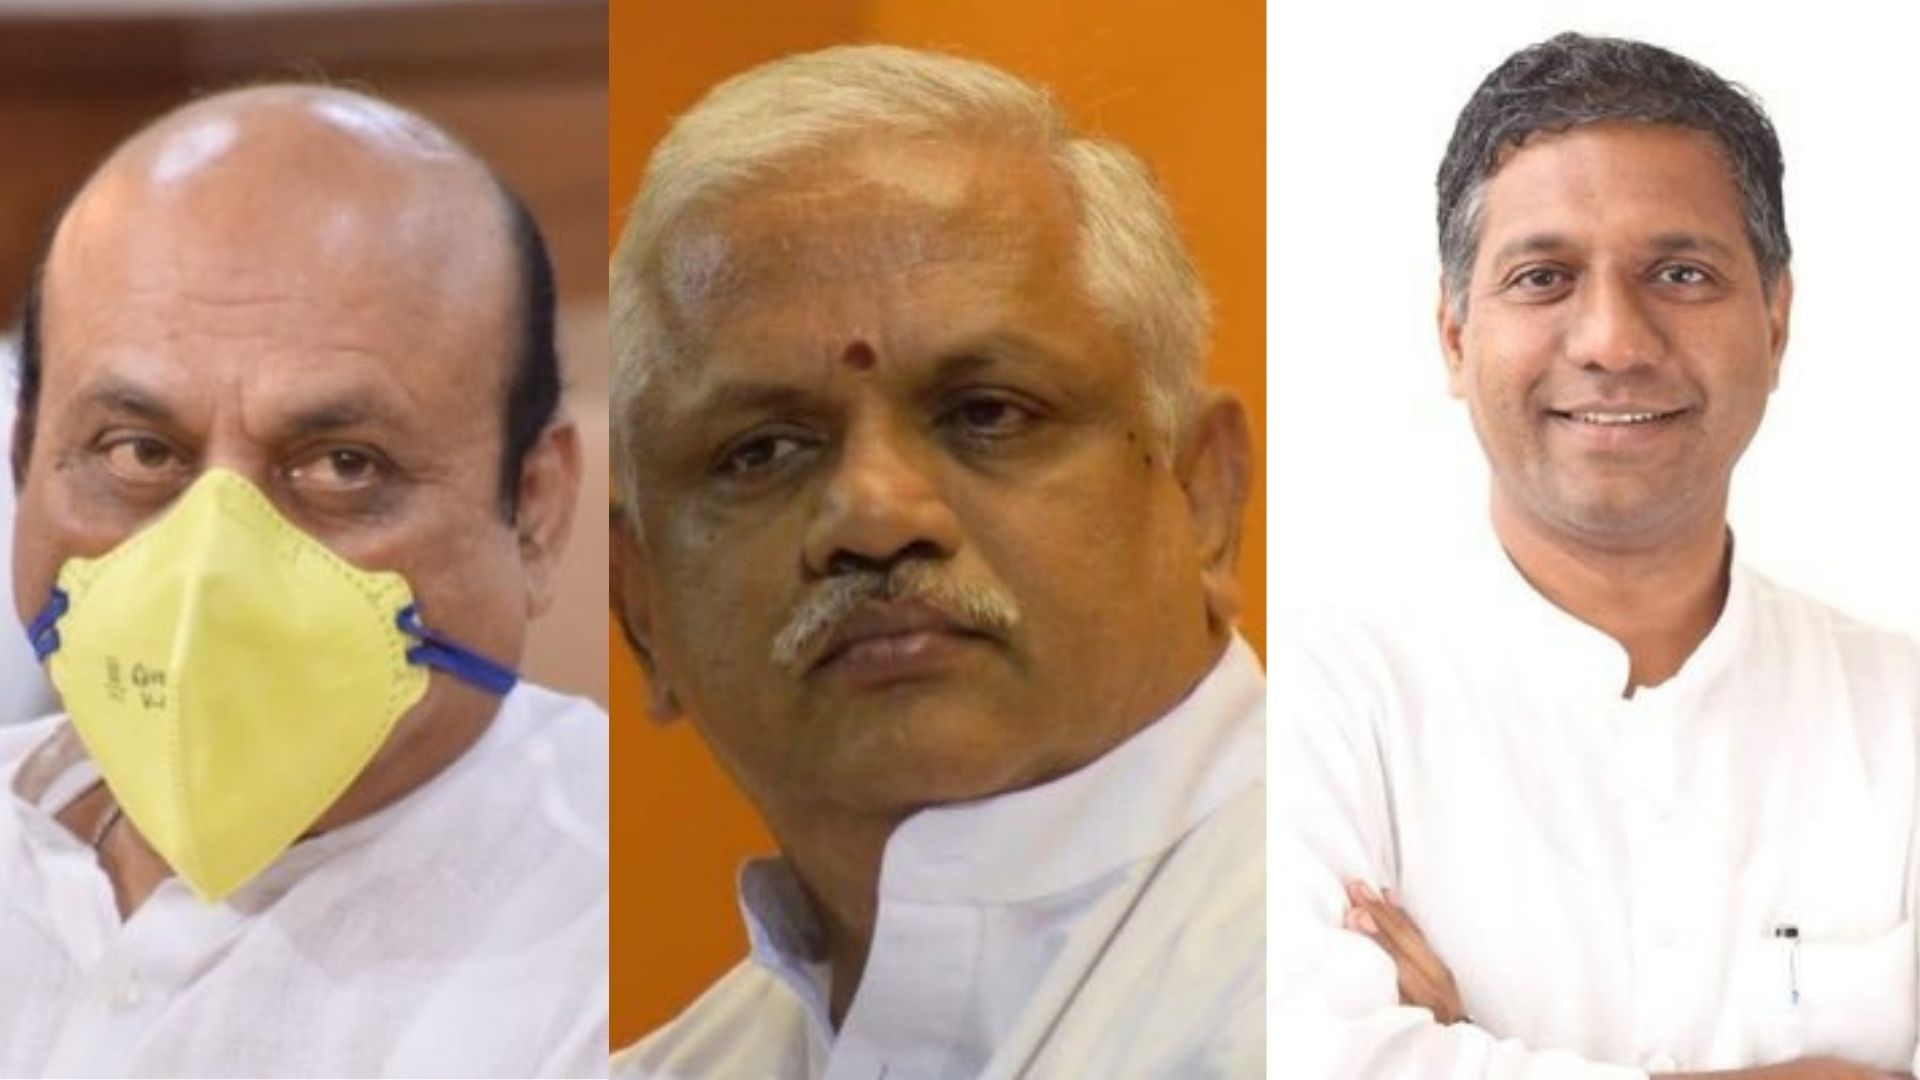 Who will be the next Karnataka CM? List of frontrunners